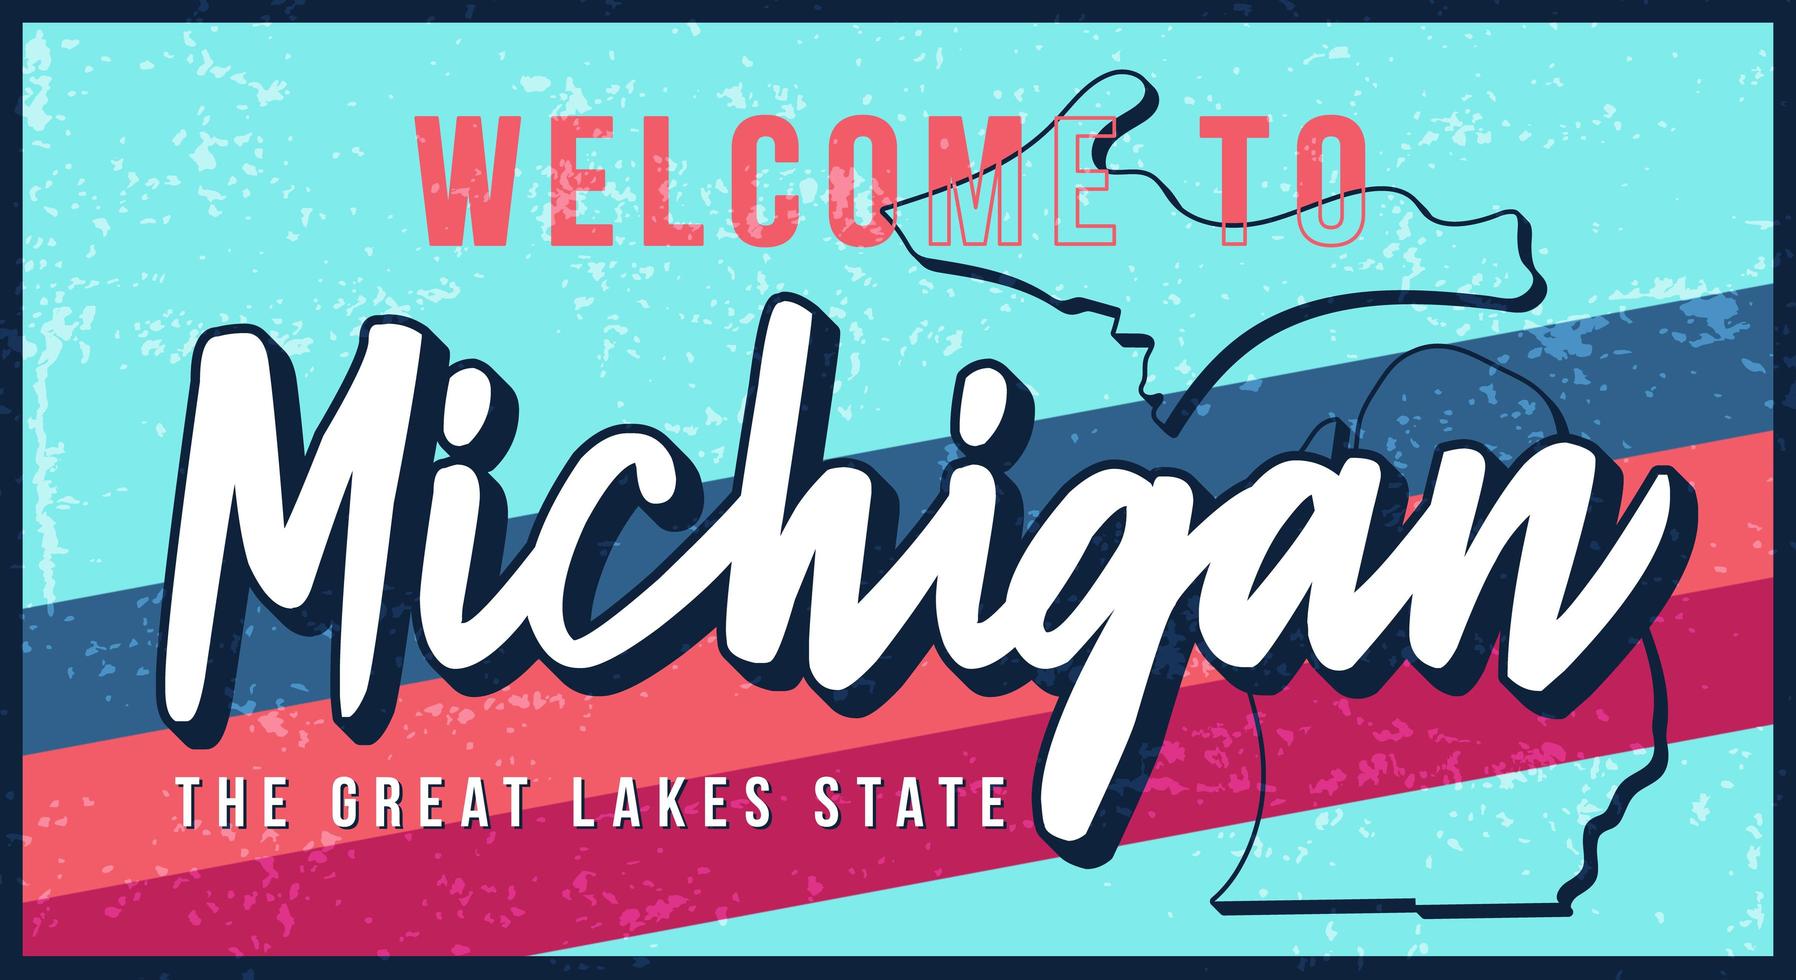 Welcome to Michigan vintage rusty metal sign vector illustration. Vector state map in grunge style with Typography hand drawn lettering